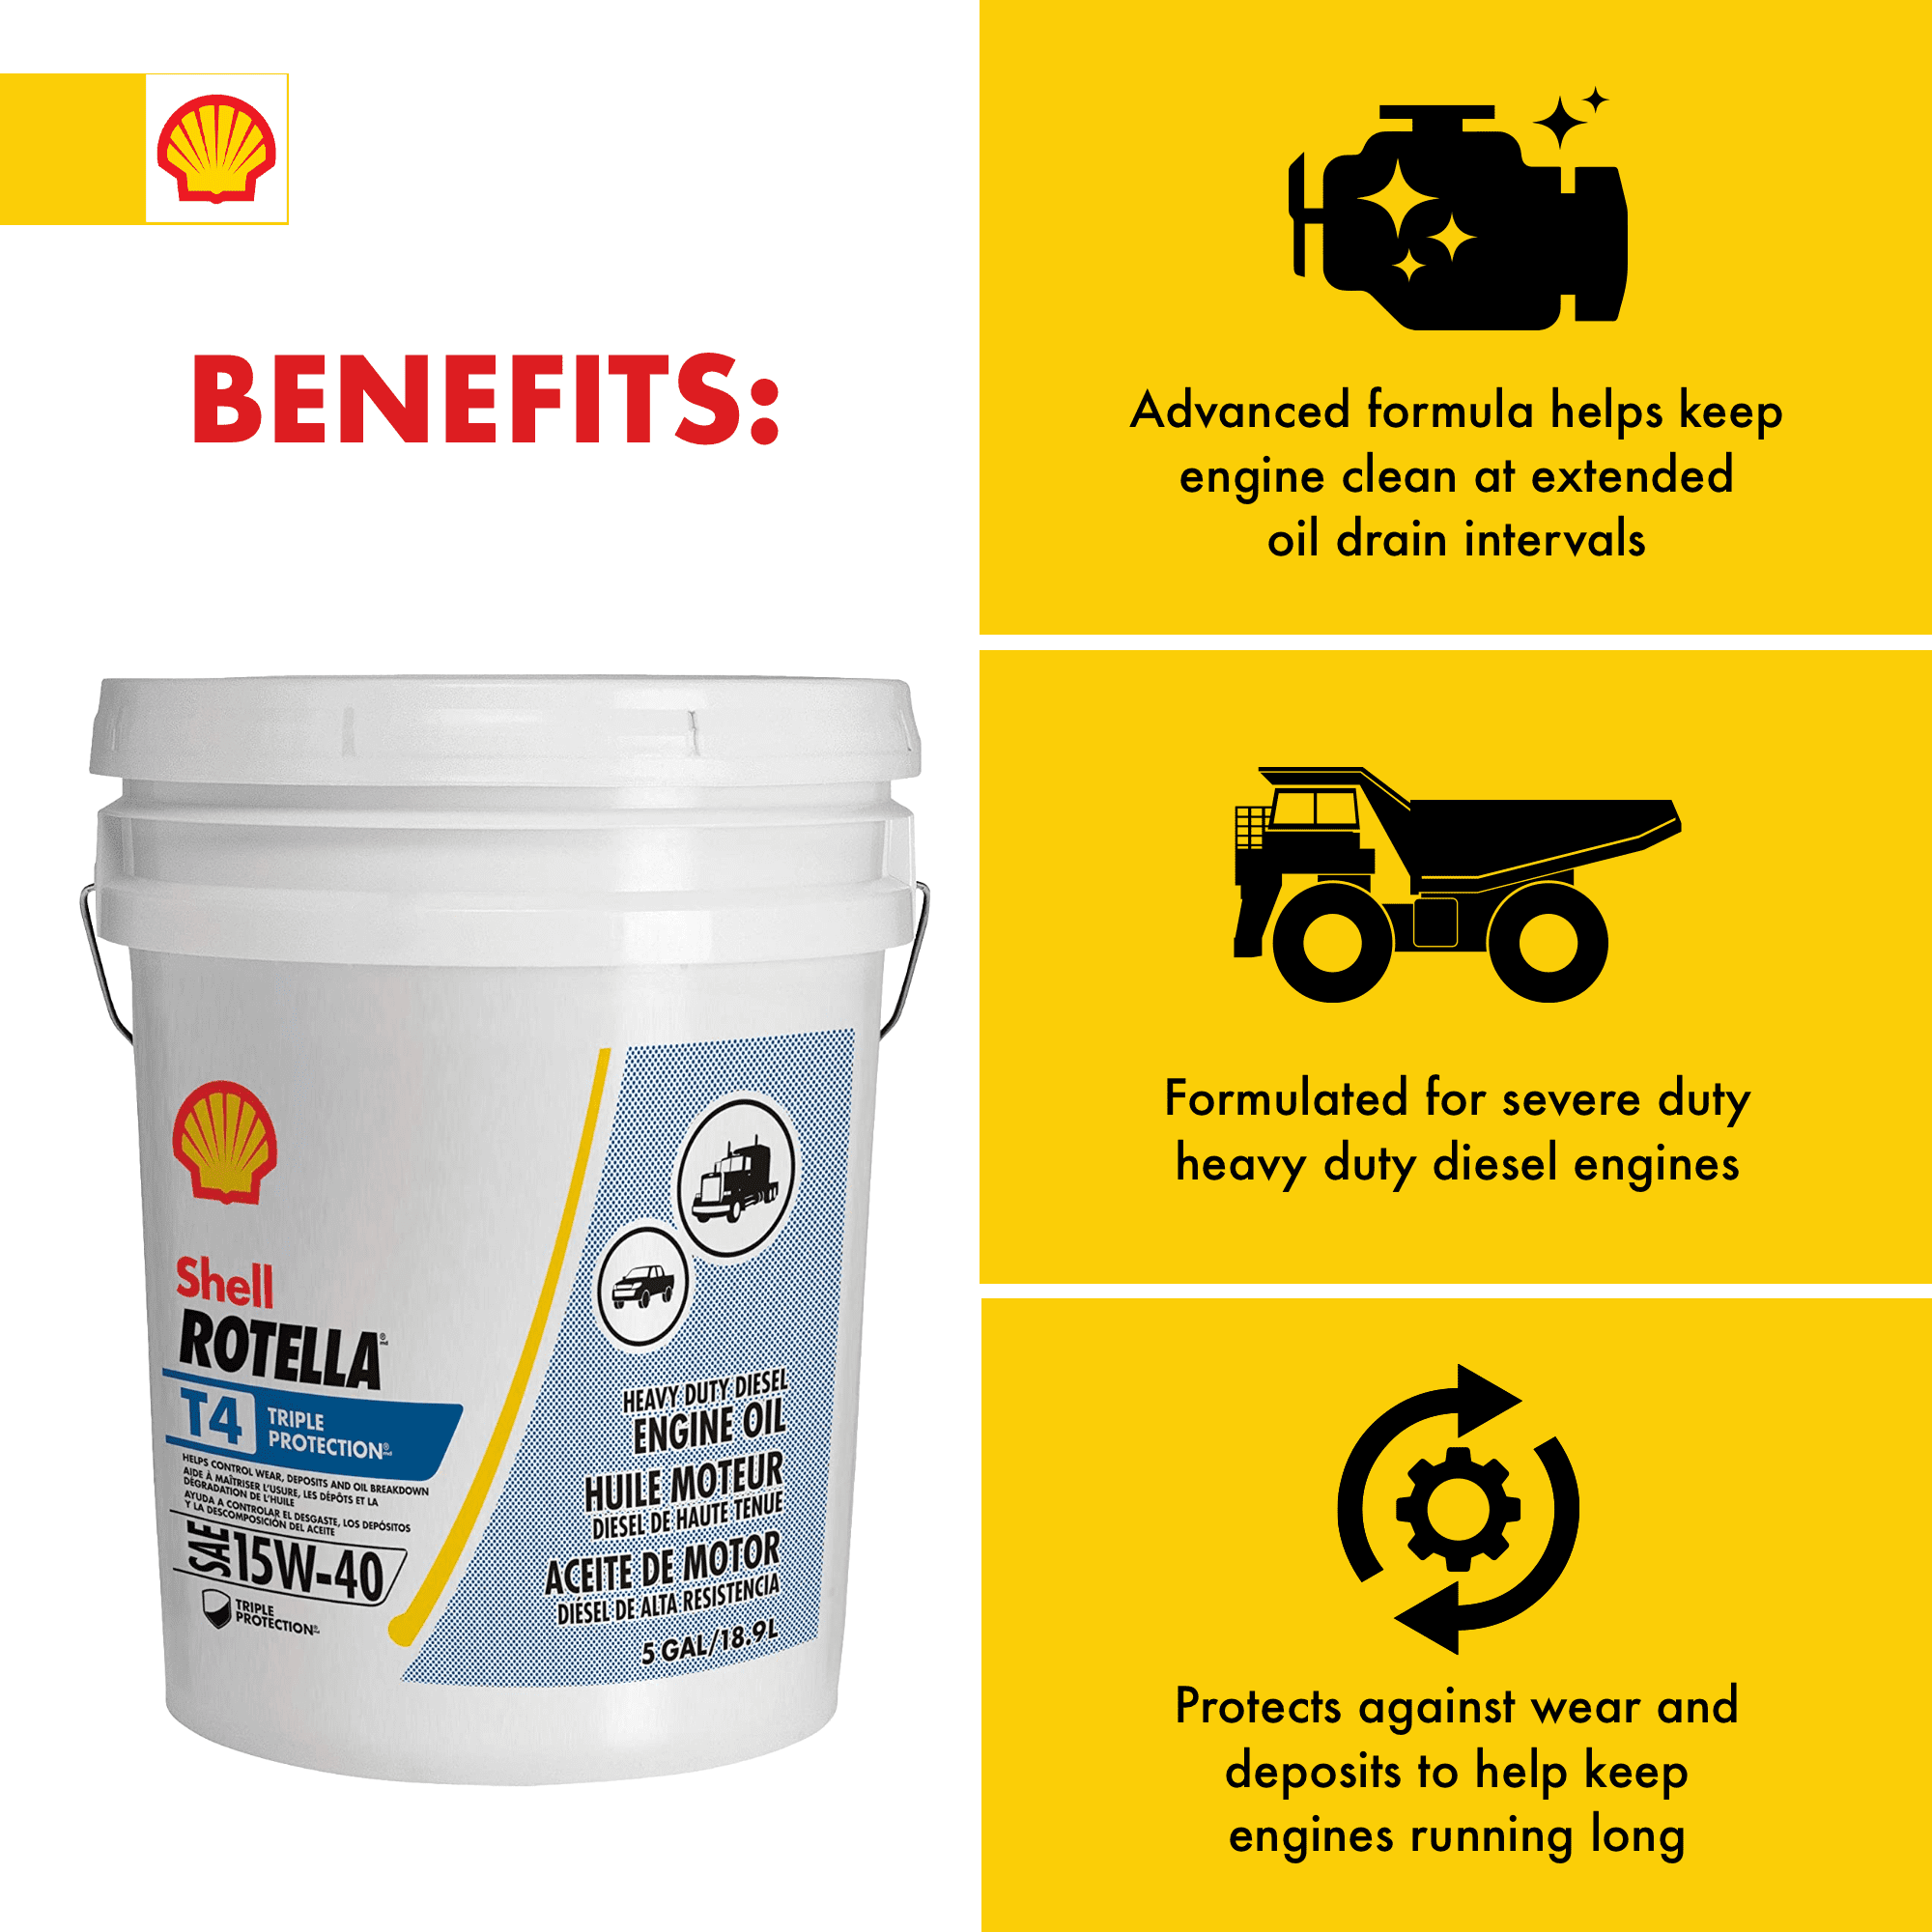 Shell Rotella T4 Triple Protection 15W-40 Diesel Motor Oil, 5 Gallon Pail - 1